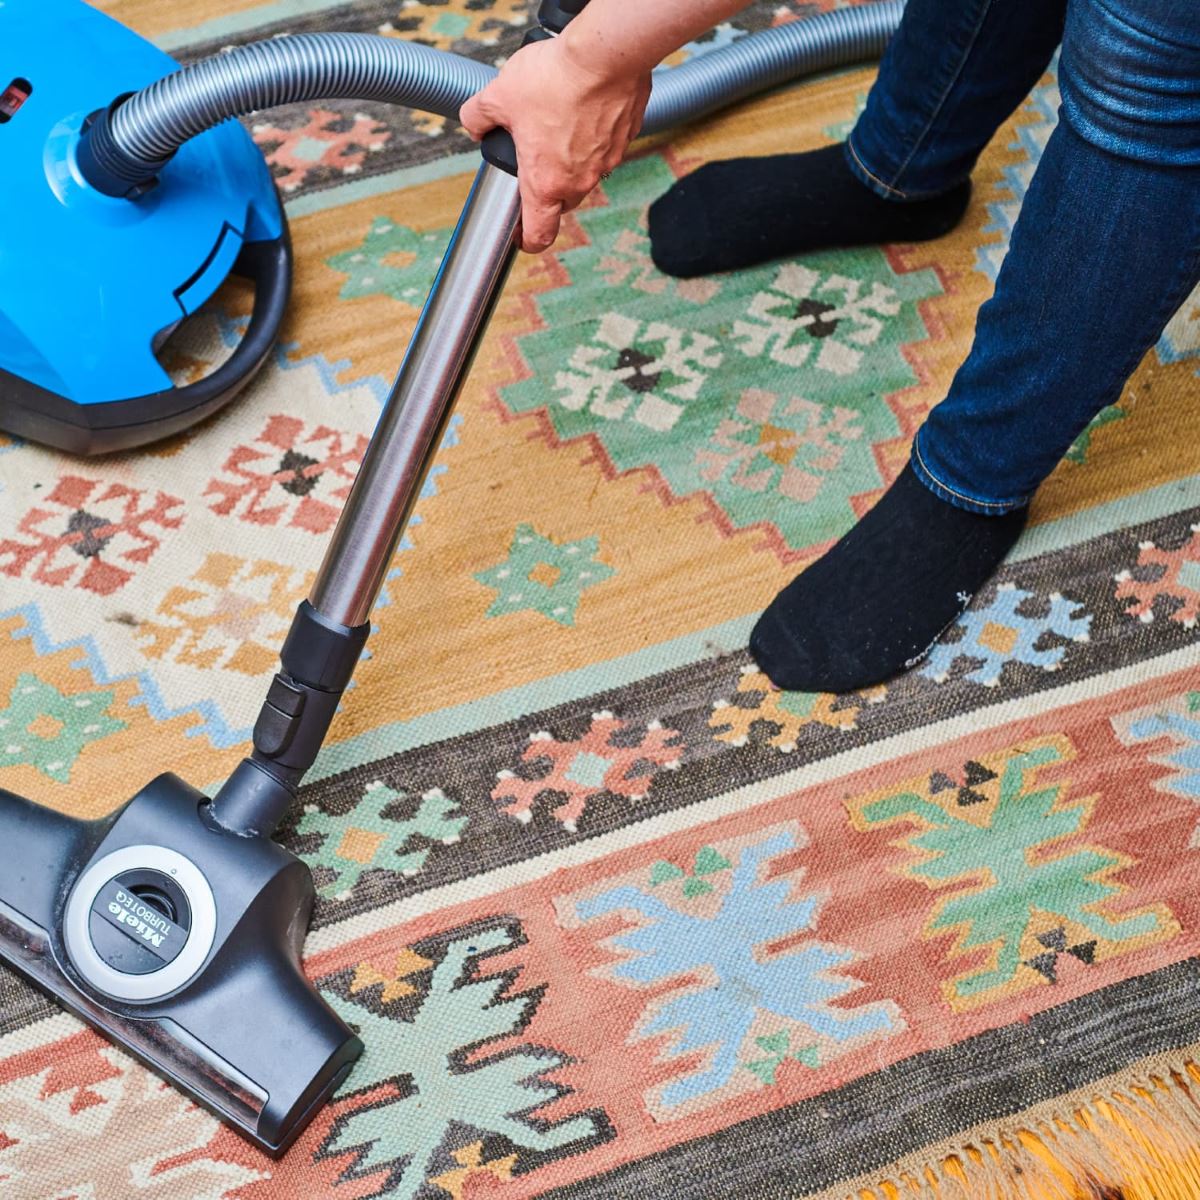 Where To Take A Rug To Get Cleaned